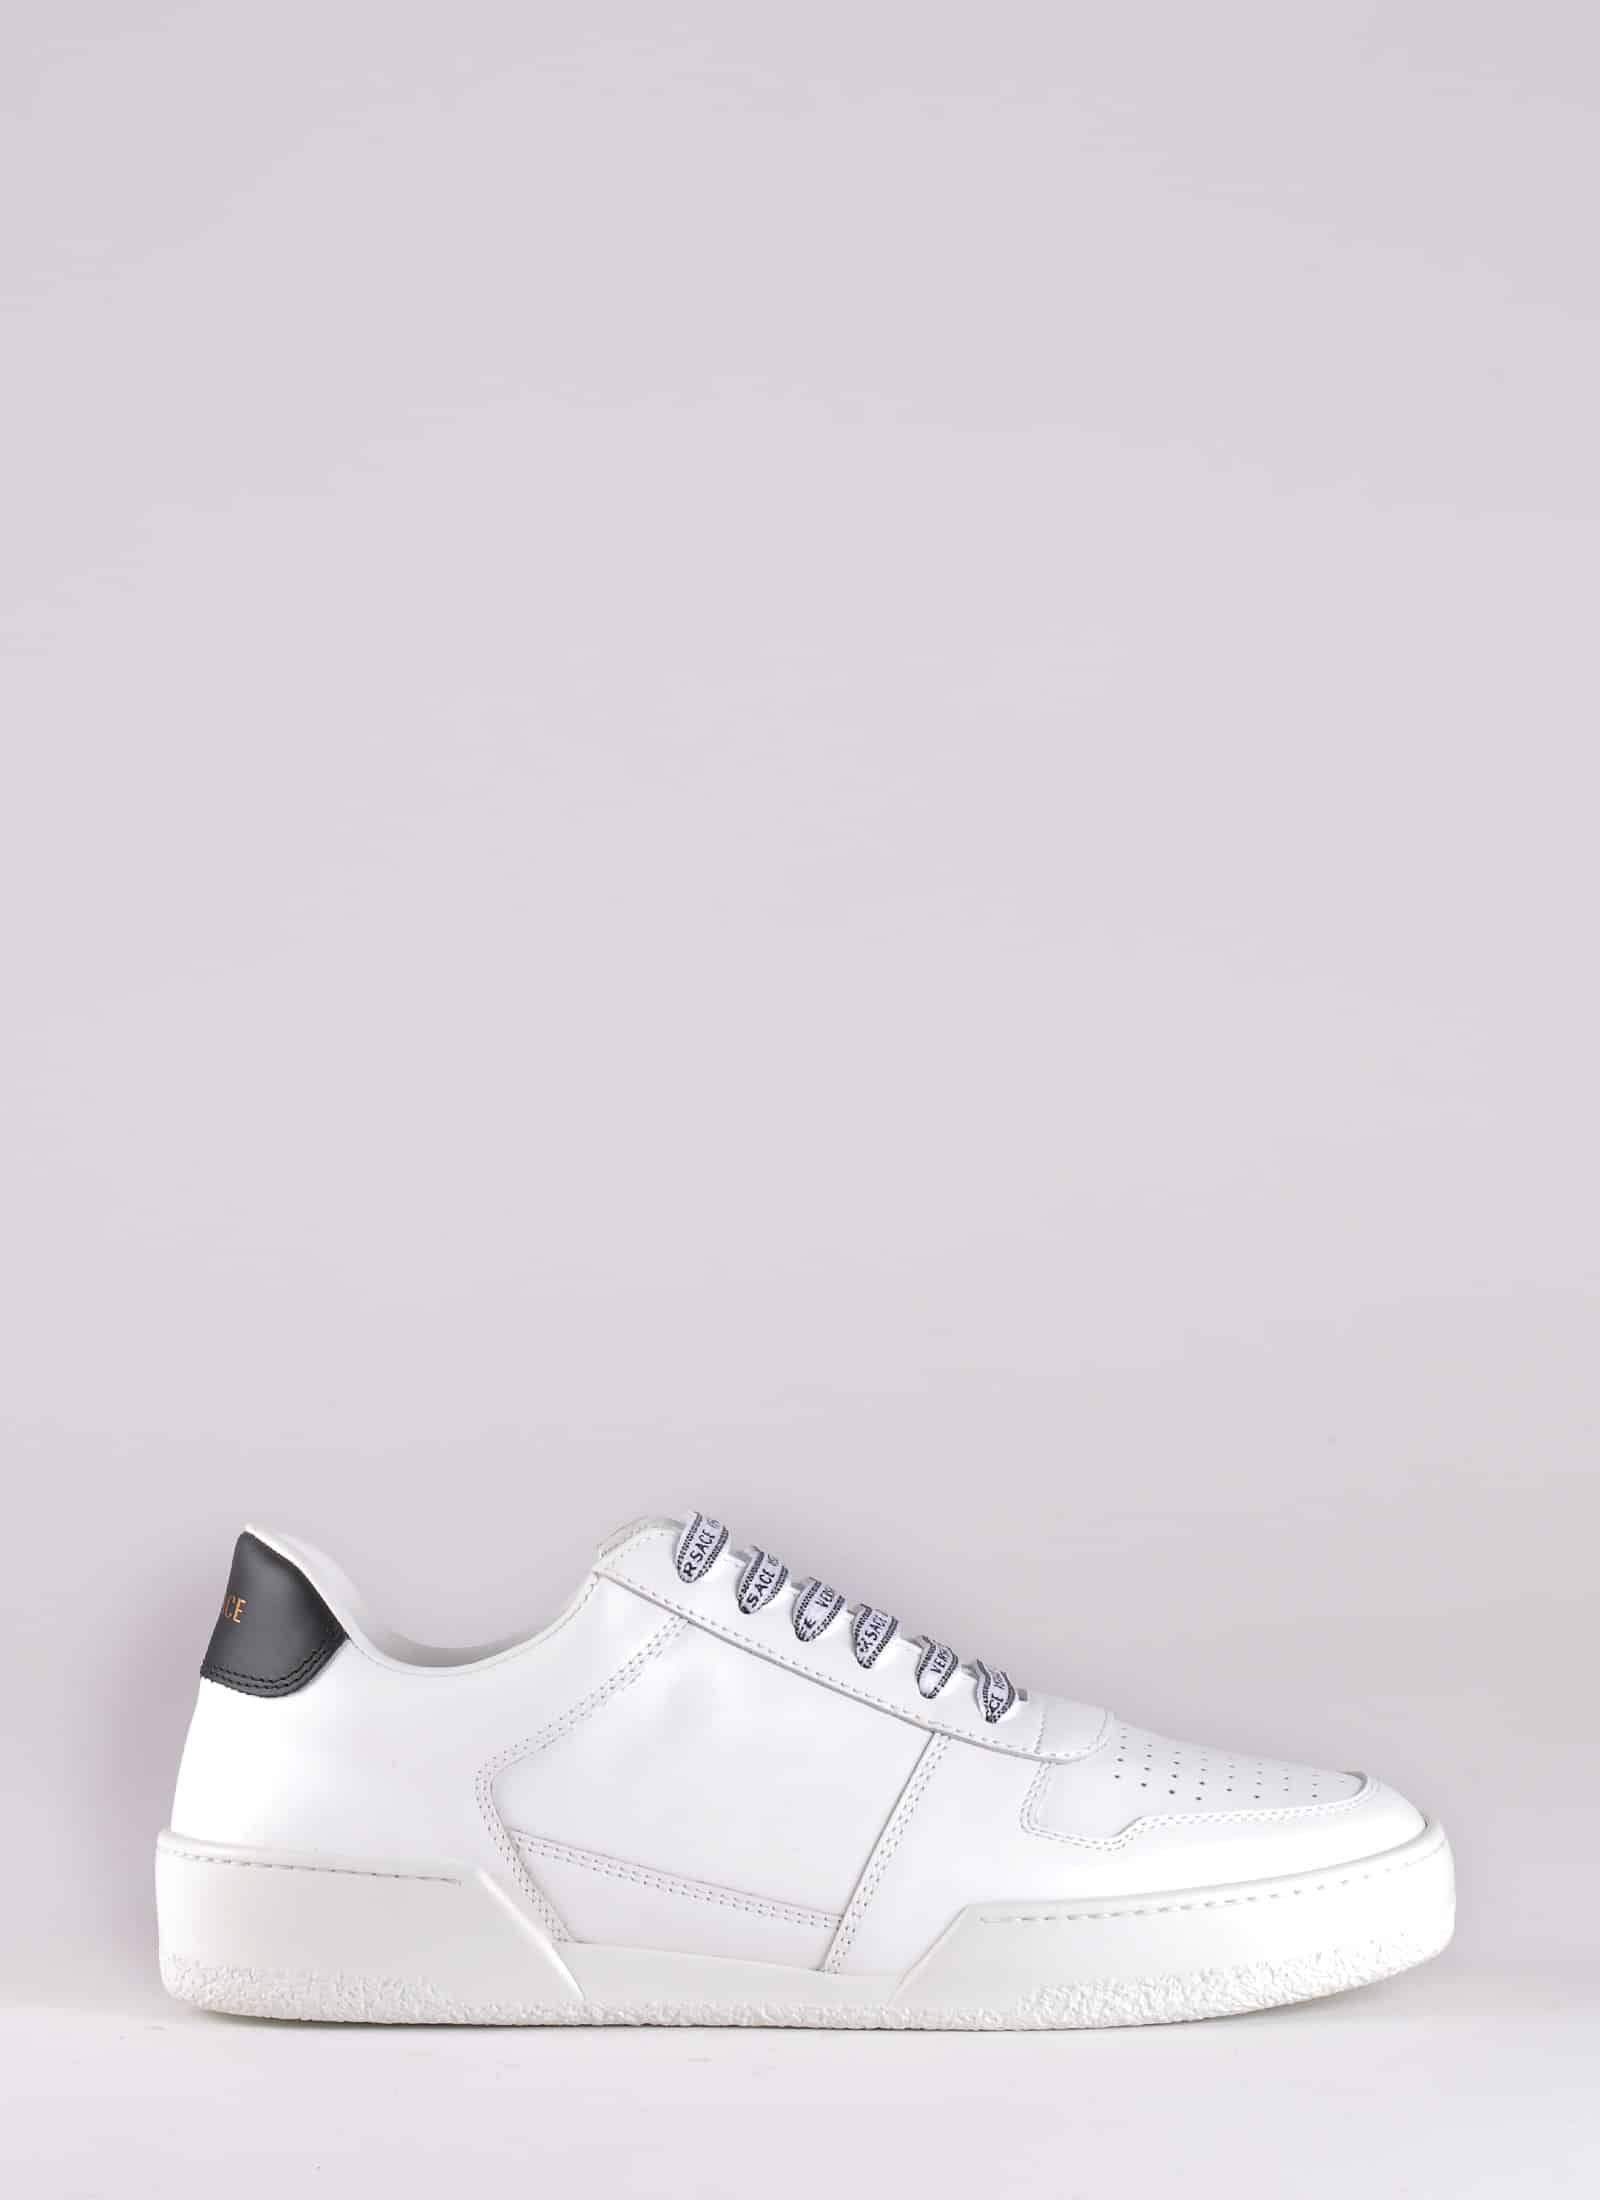 LEATHER SNEAKERS - VERSACE